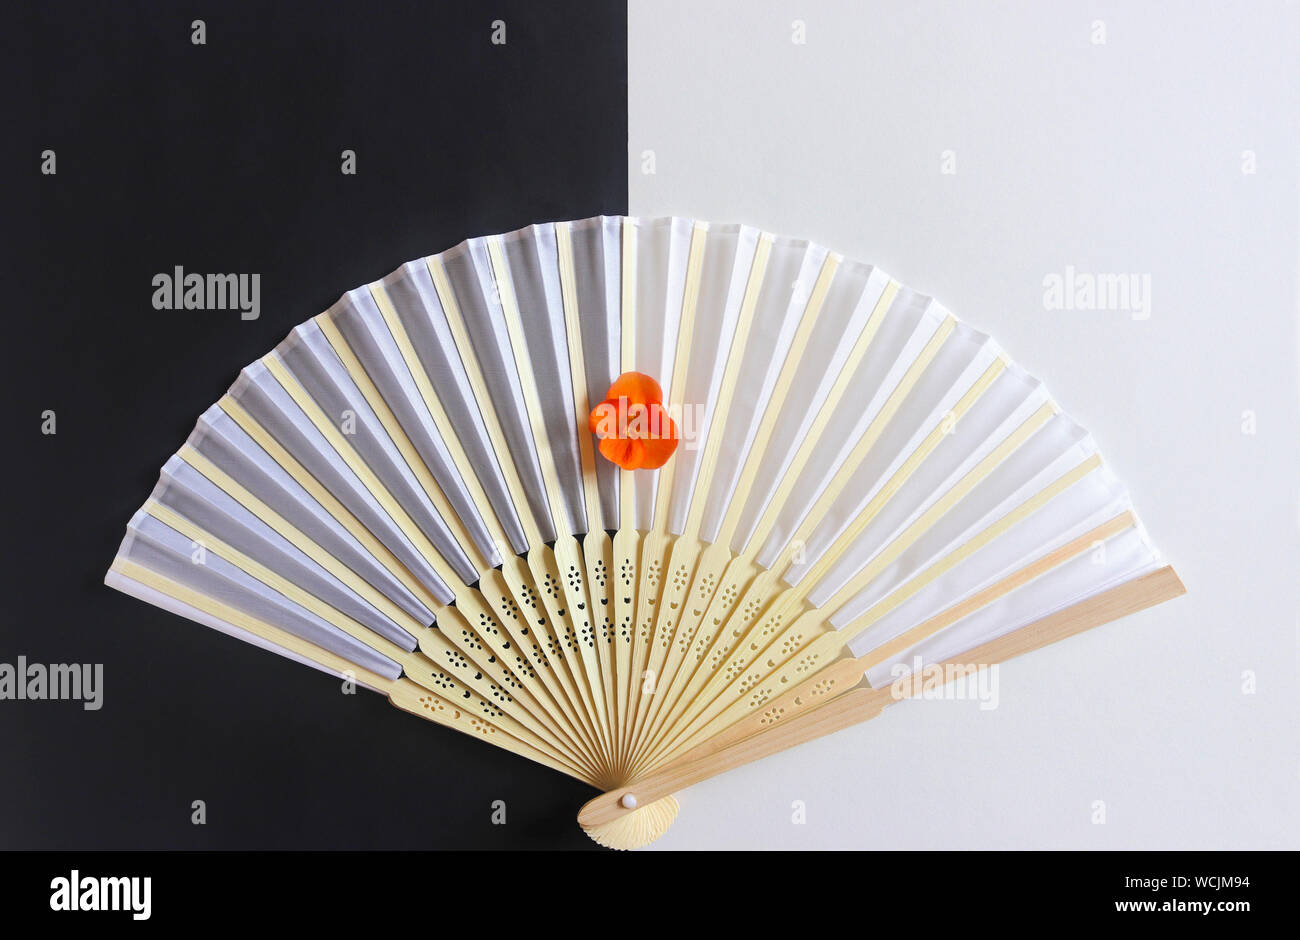 decorative white hand fan with a wooden grip and an orange colored blossom on black and white paper Stock Photo